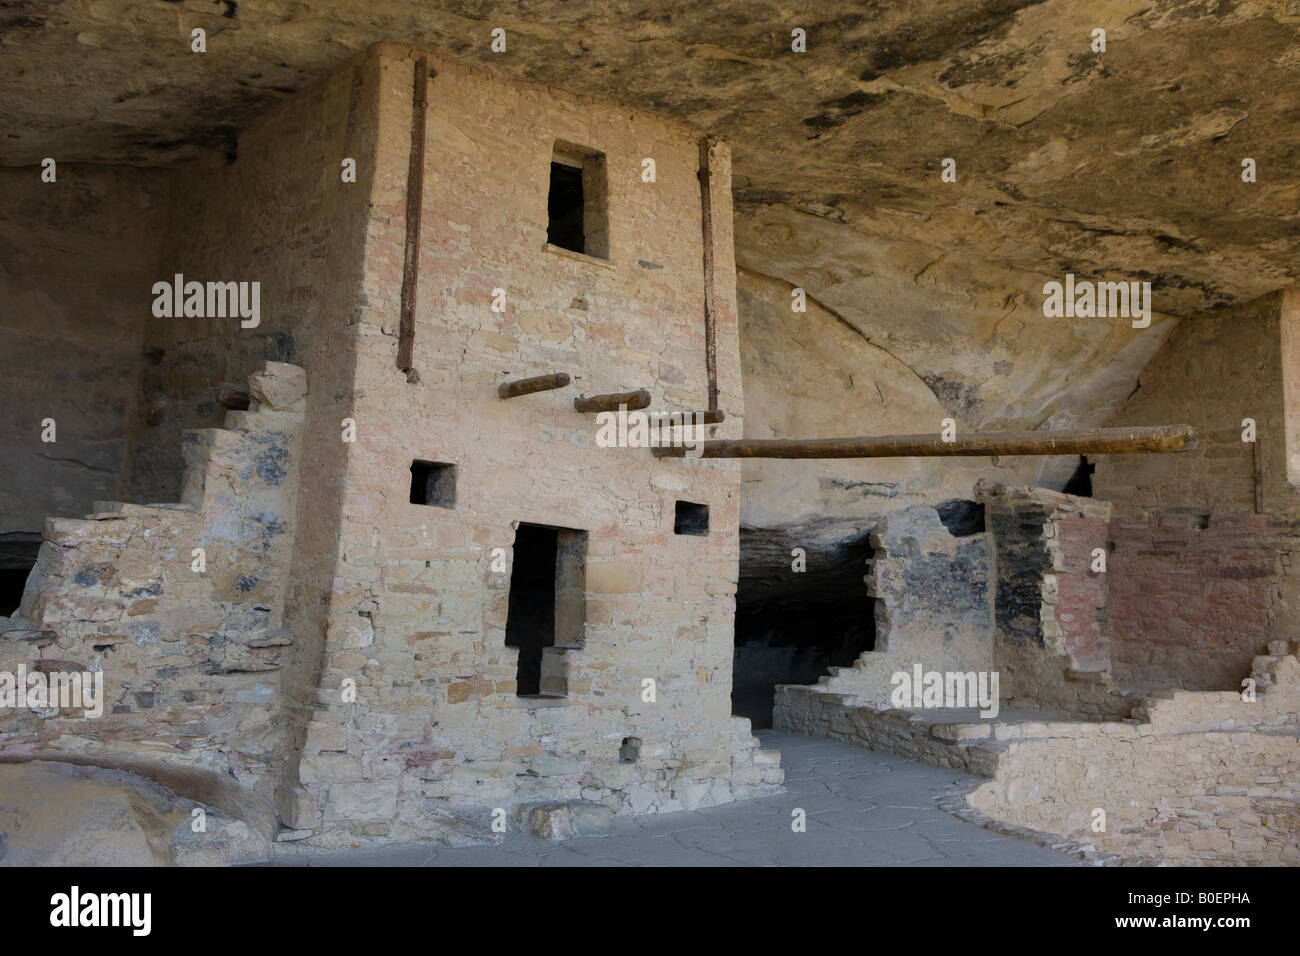 Balcony House ruins built by the Ancient Pueblo people located in Mesa Verde National Park near Cortez Colorado Stock Photo